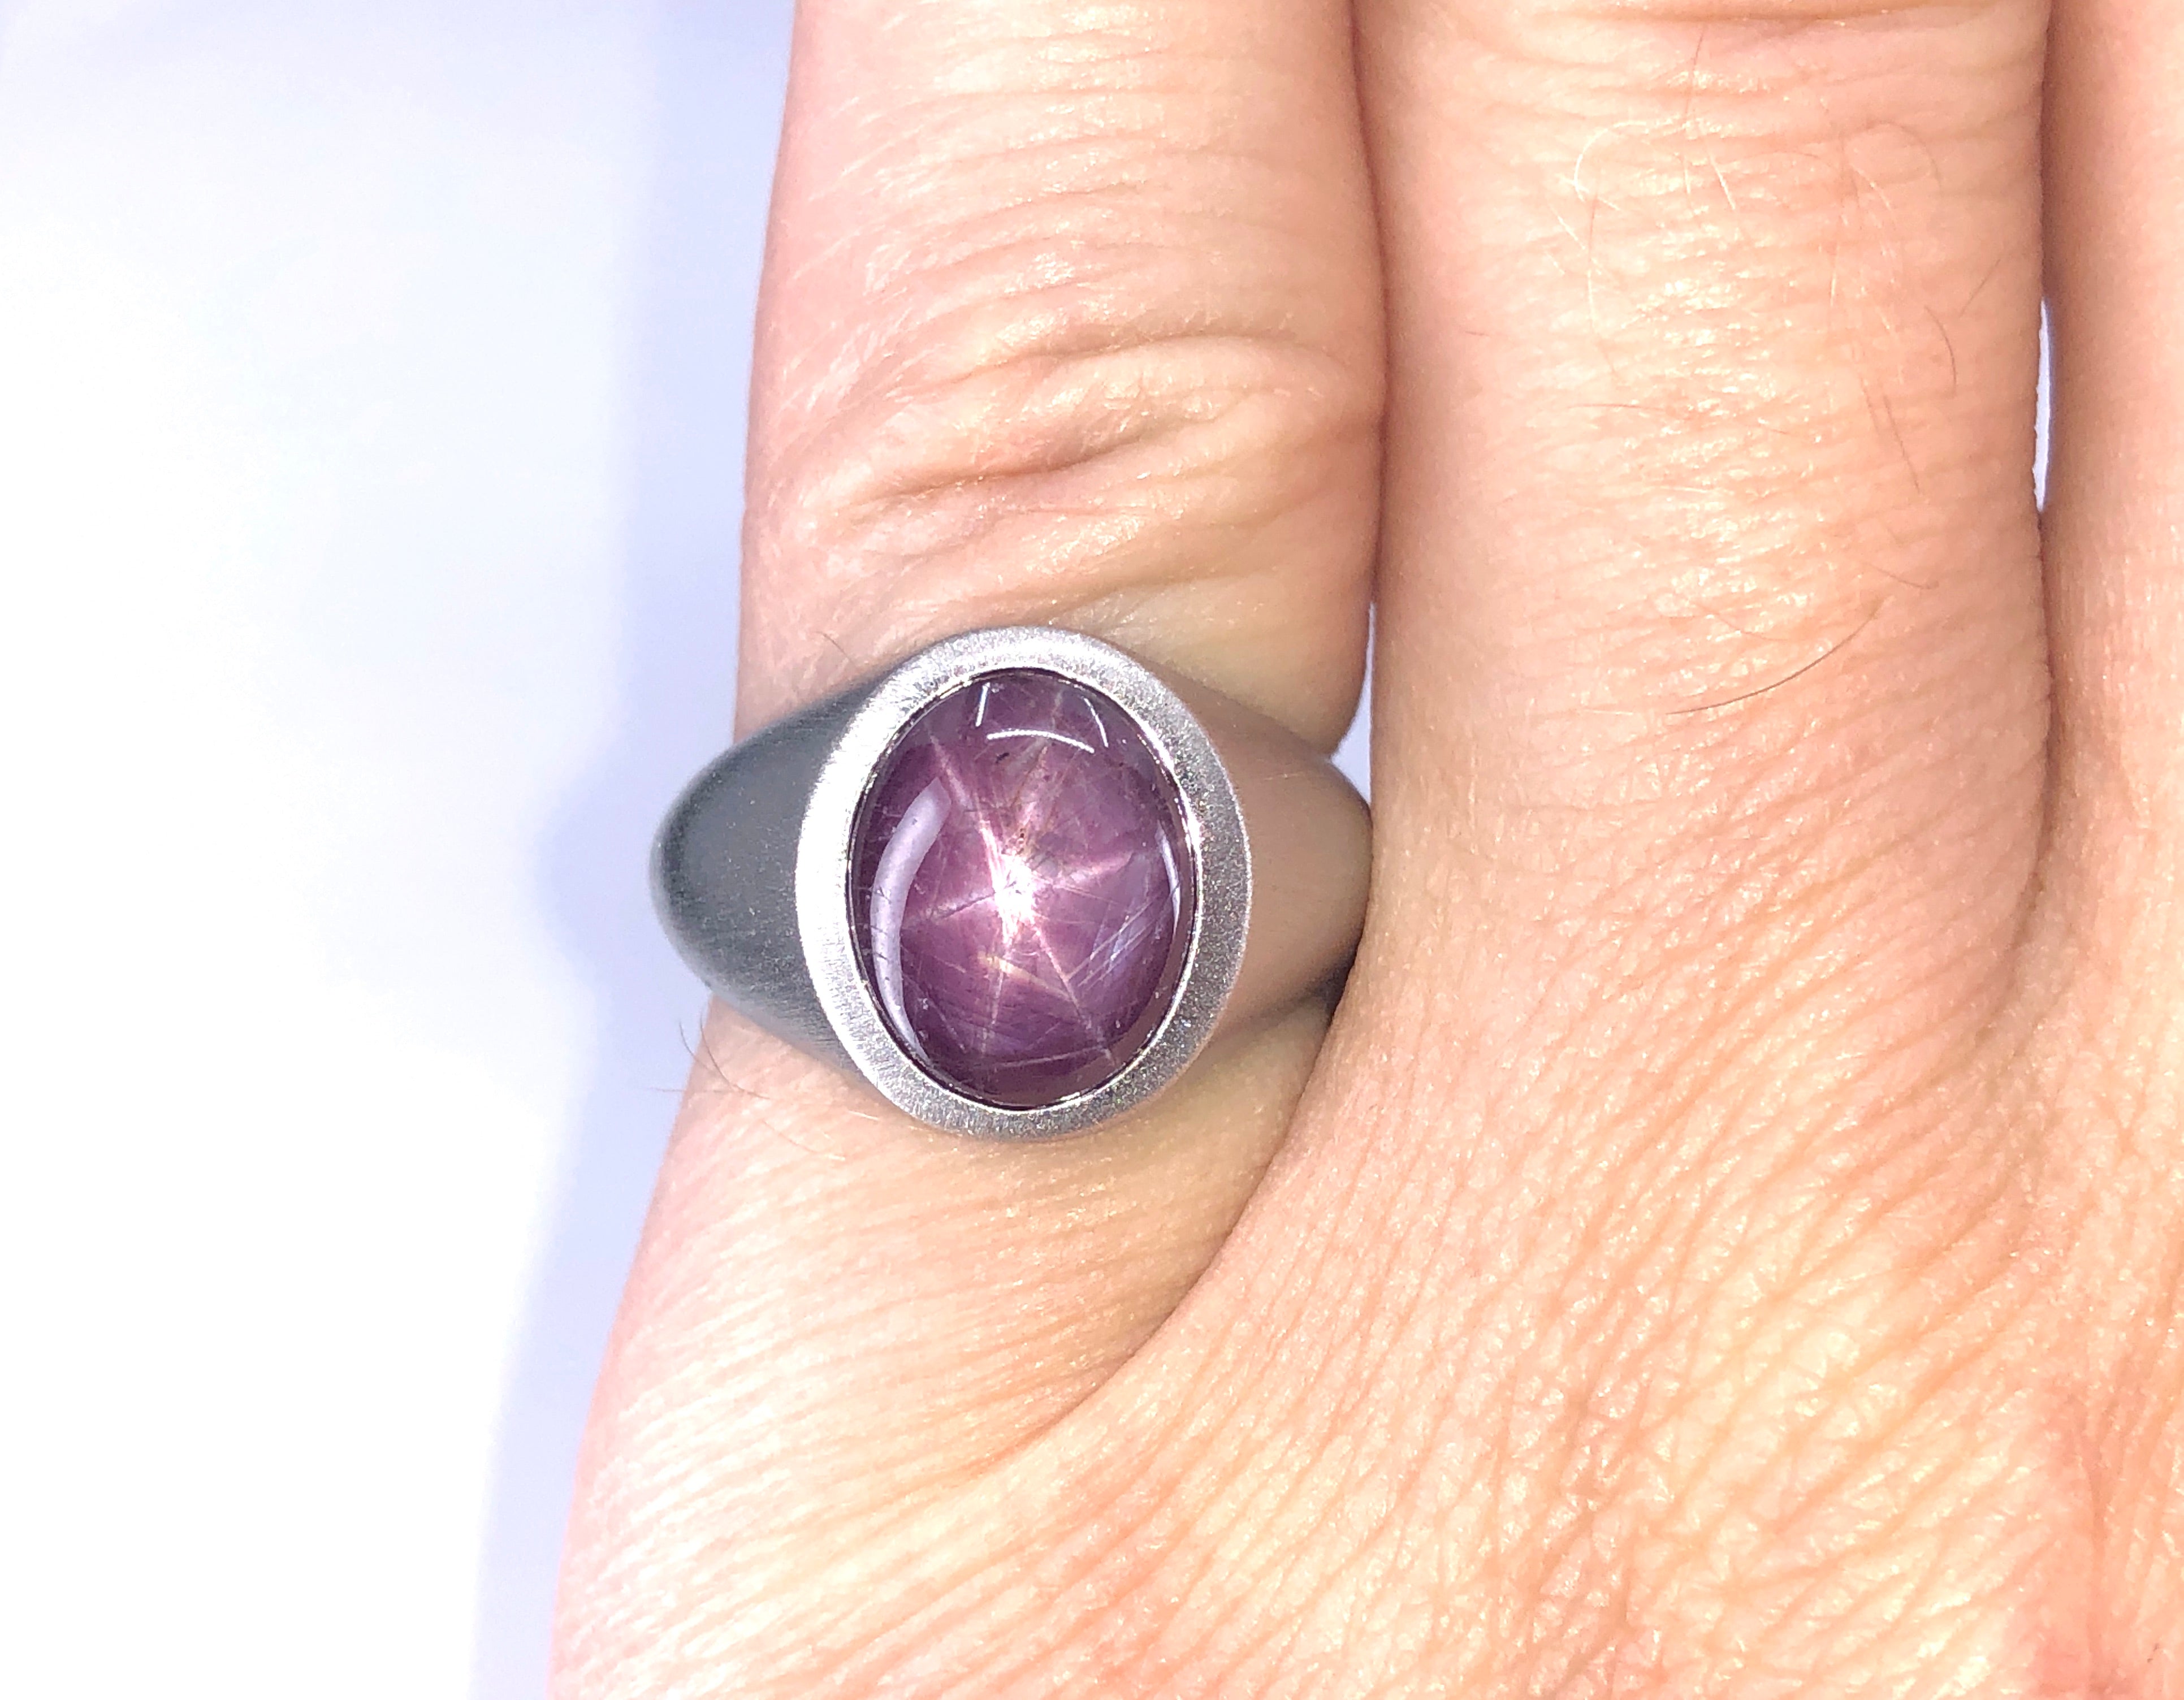 Star Sapphire Ring - Diamond Engagement Rings, Sapphire Ruby and Emerald  Jewellery from Weldons of Dublin